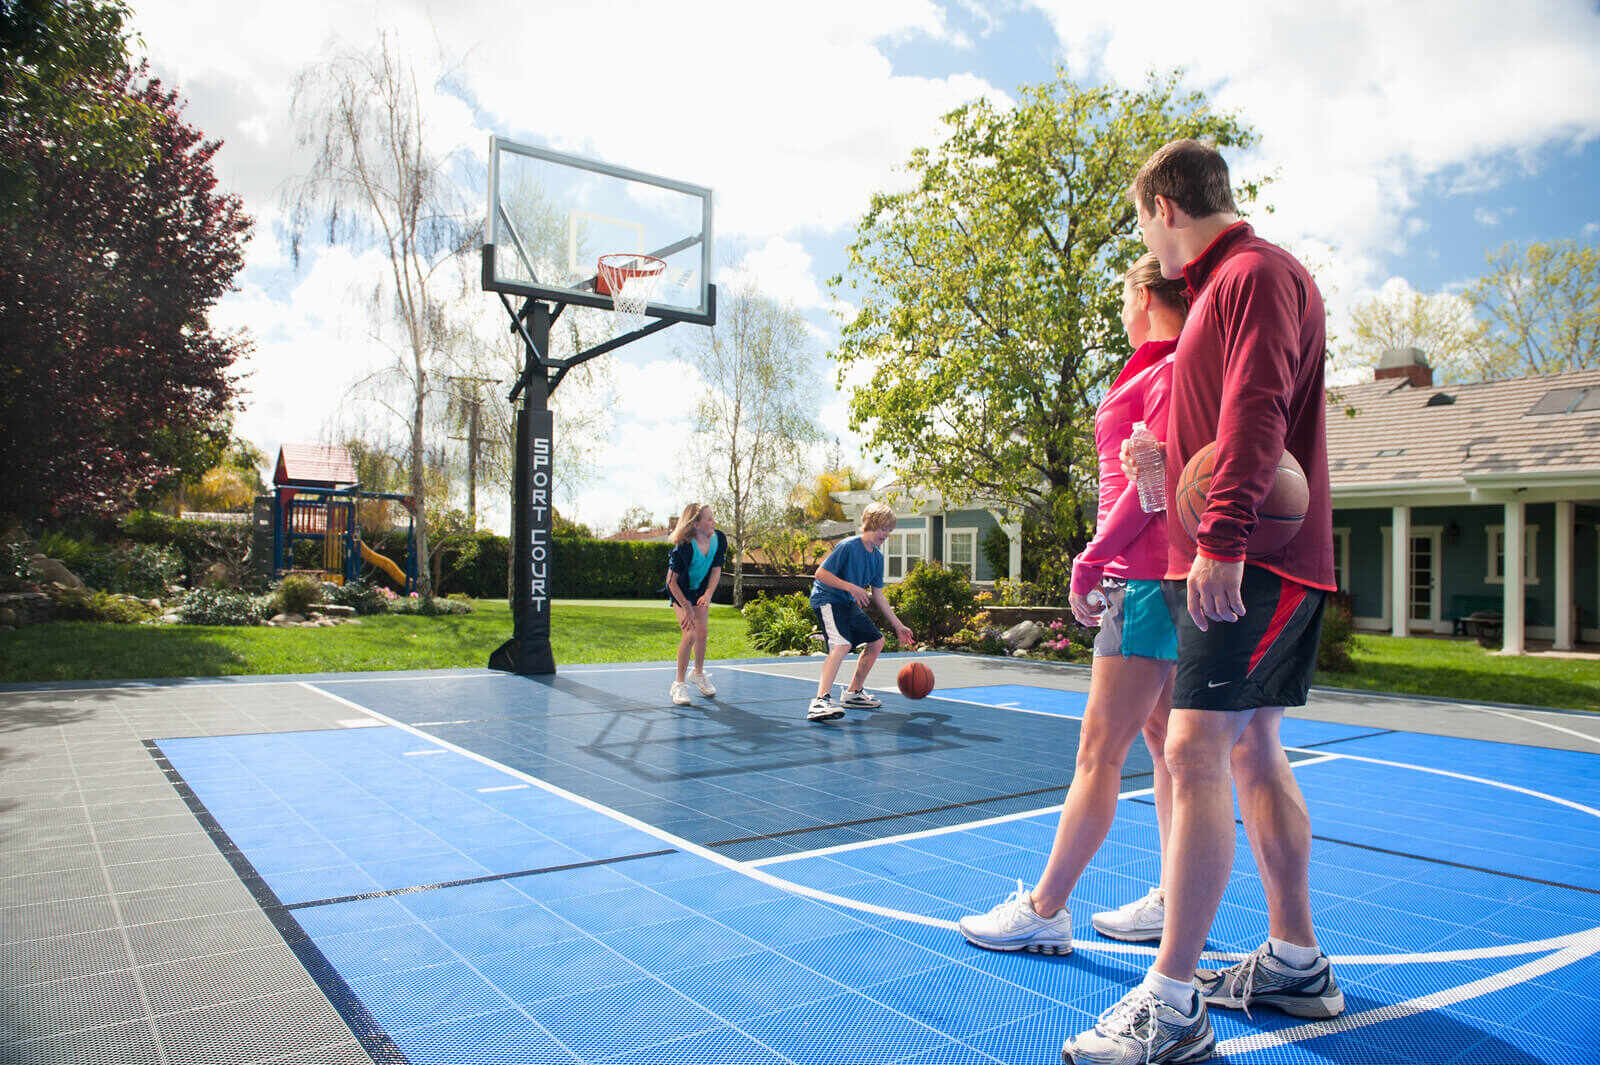 What Material Is Used For Outdoor Basketball Courts